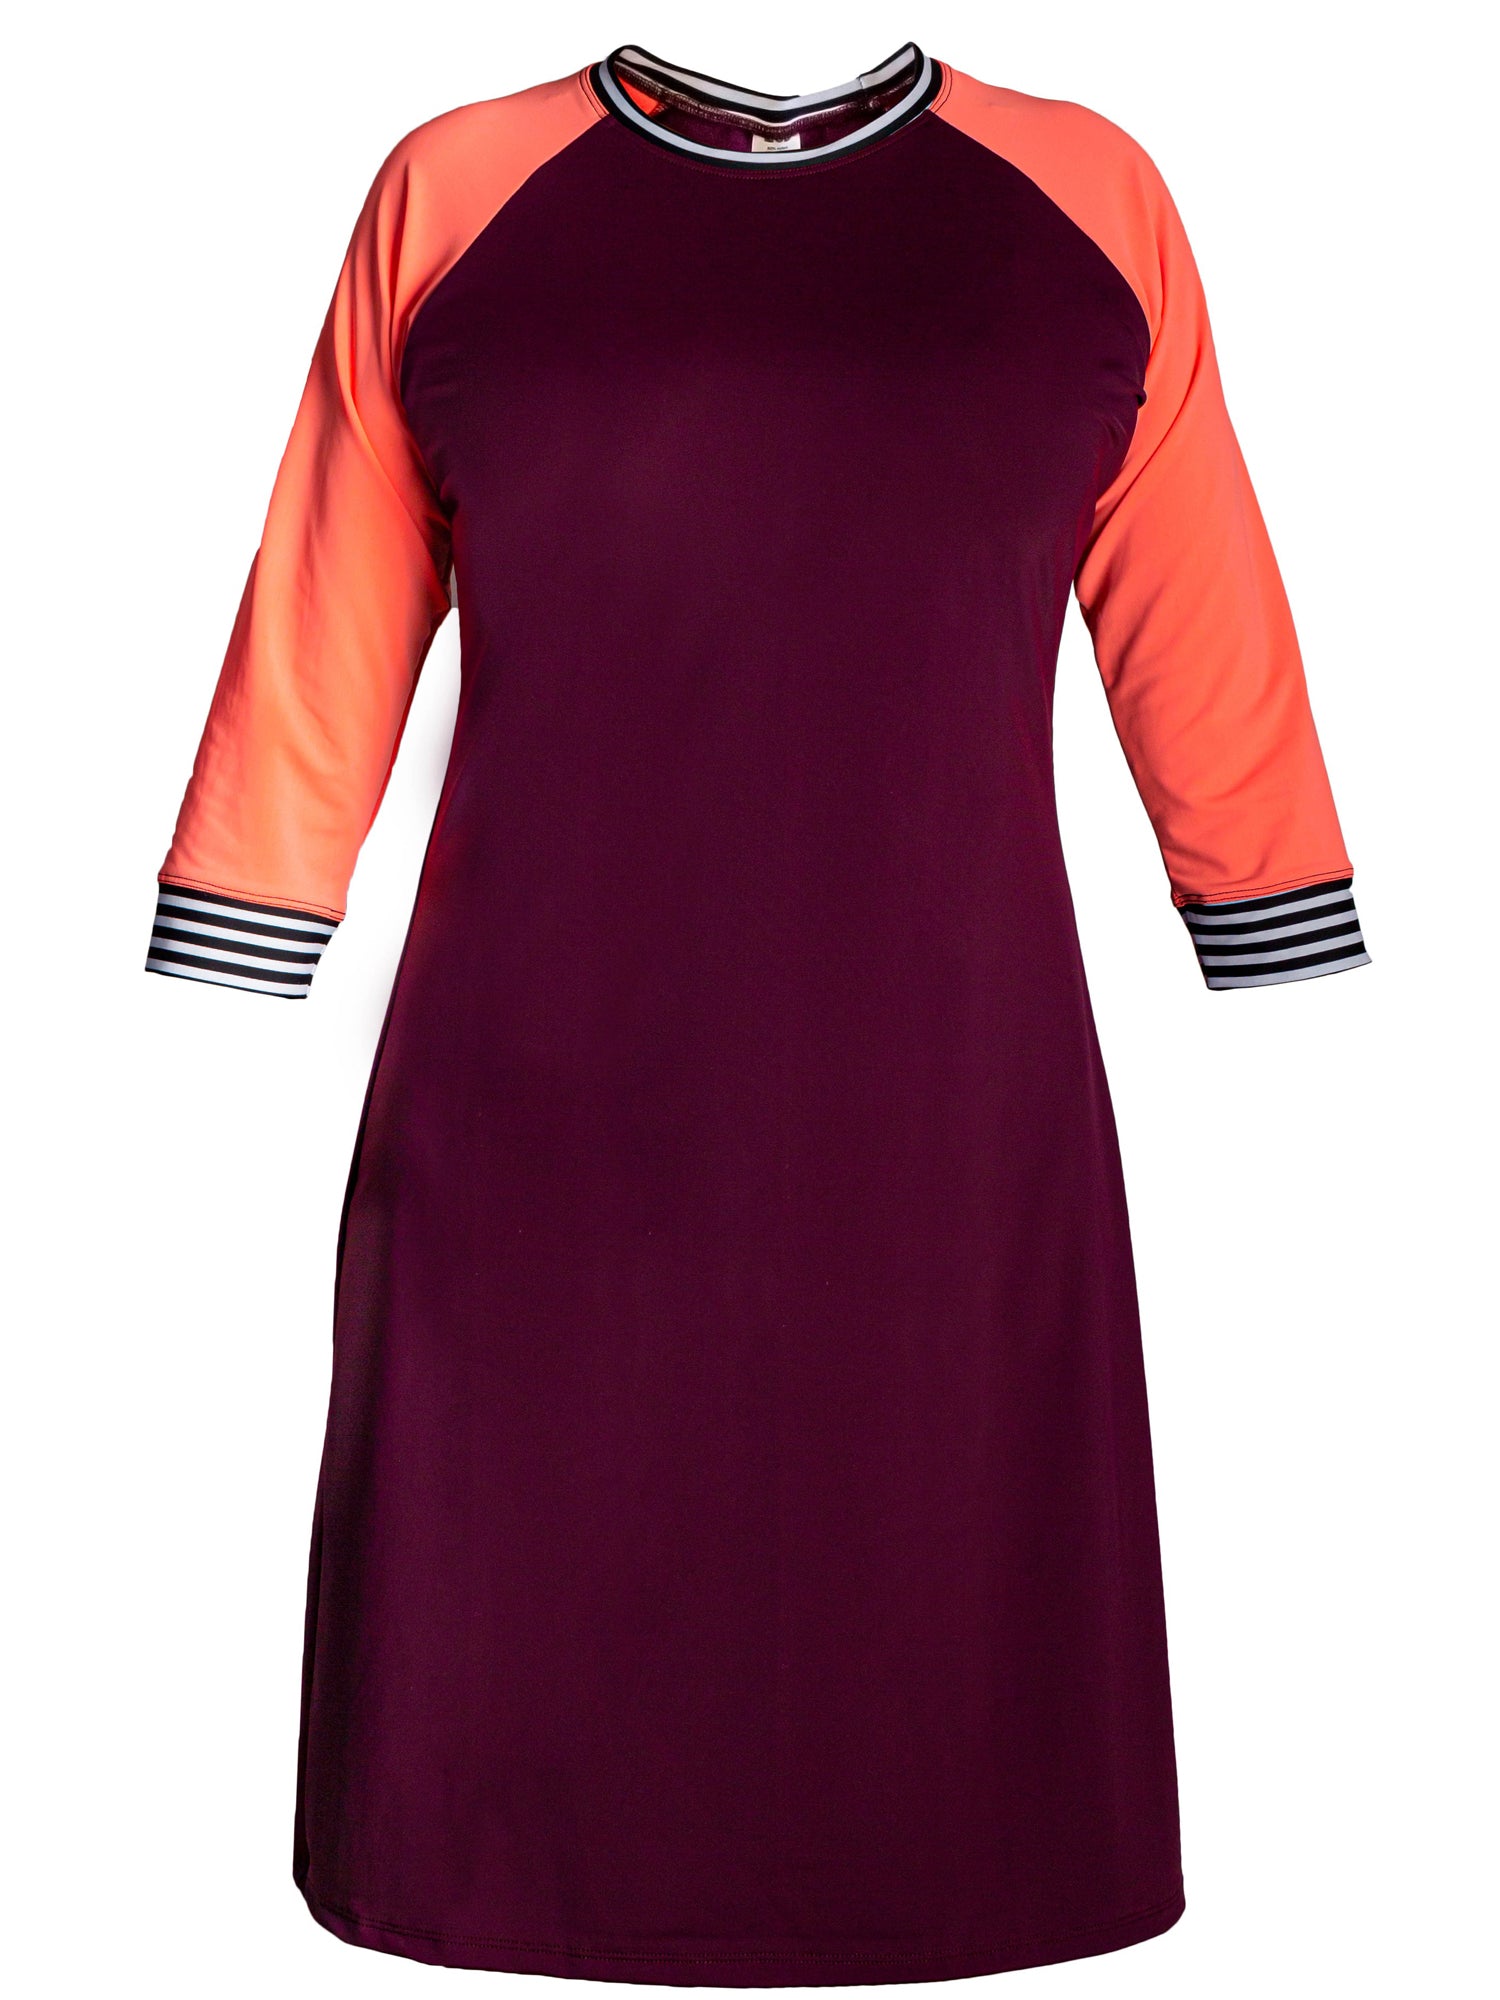 Women's modest swim dress with long sleeves in solid purple and pink long sleeves.